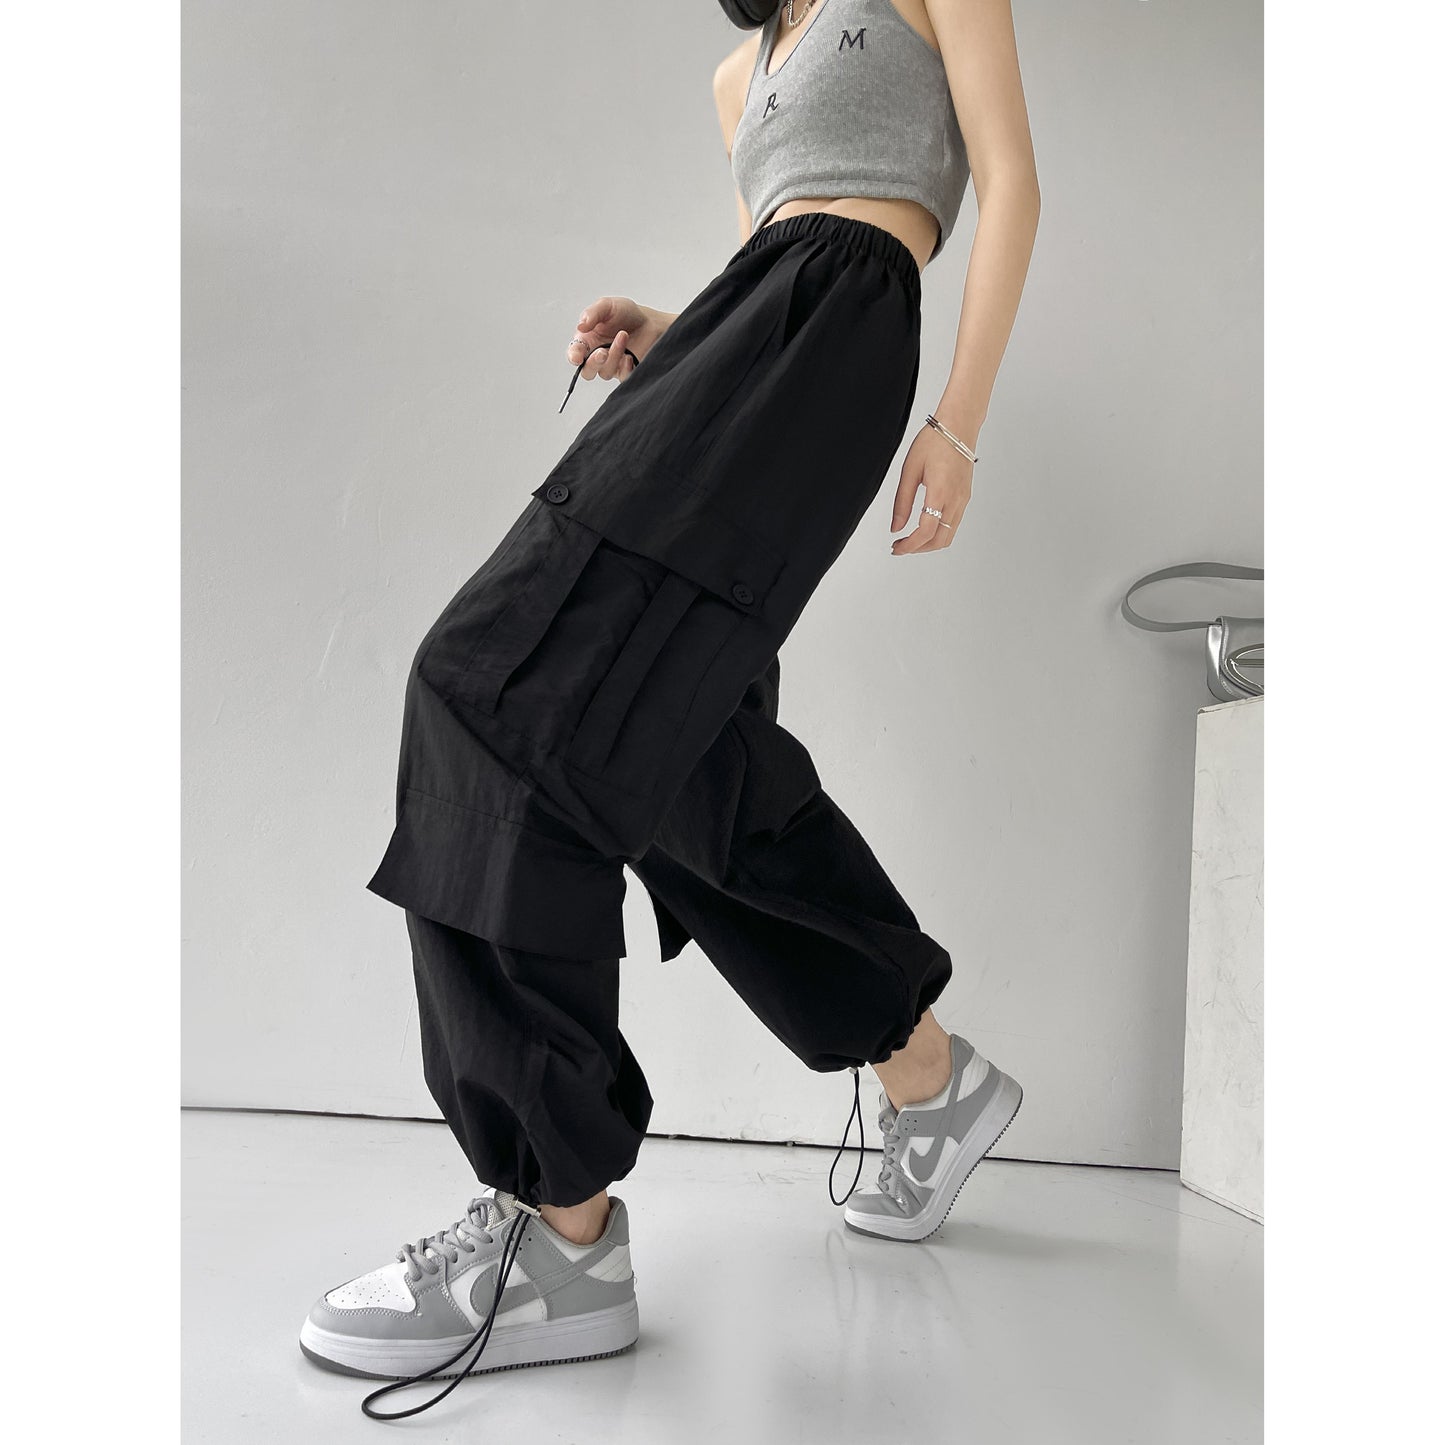 Loose Fit Casual Classic Multi-Pocket Trendy Pants